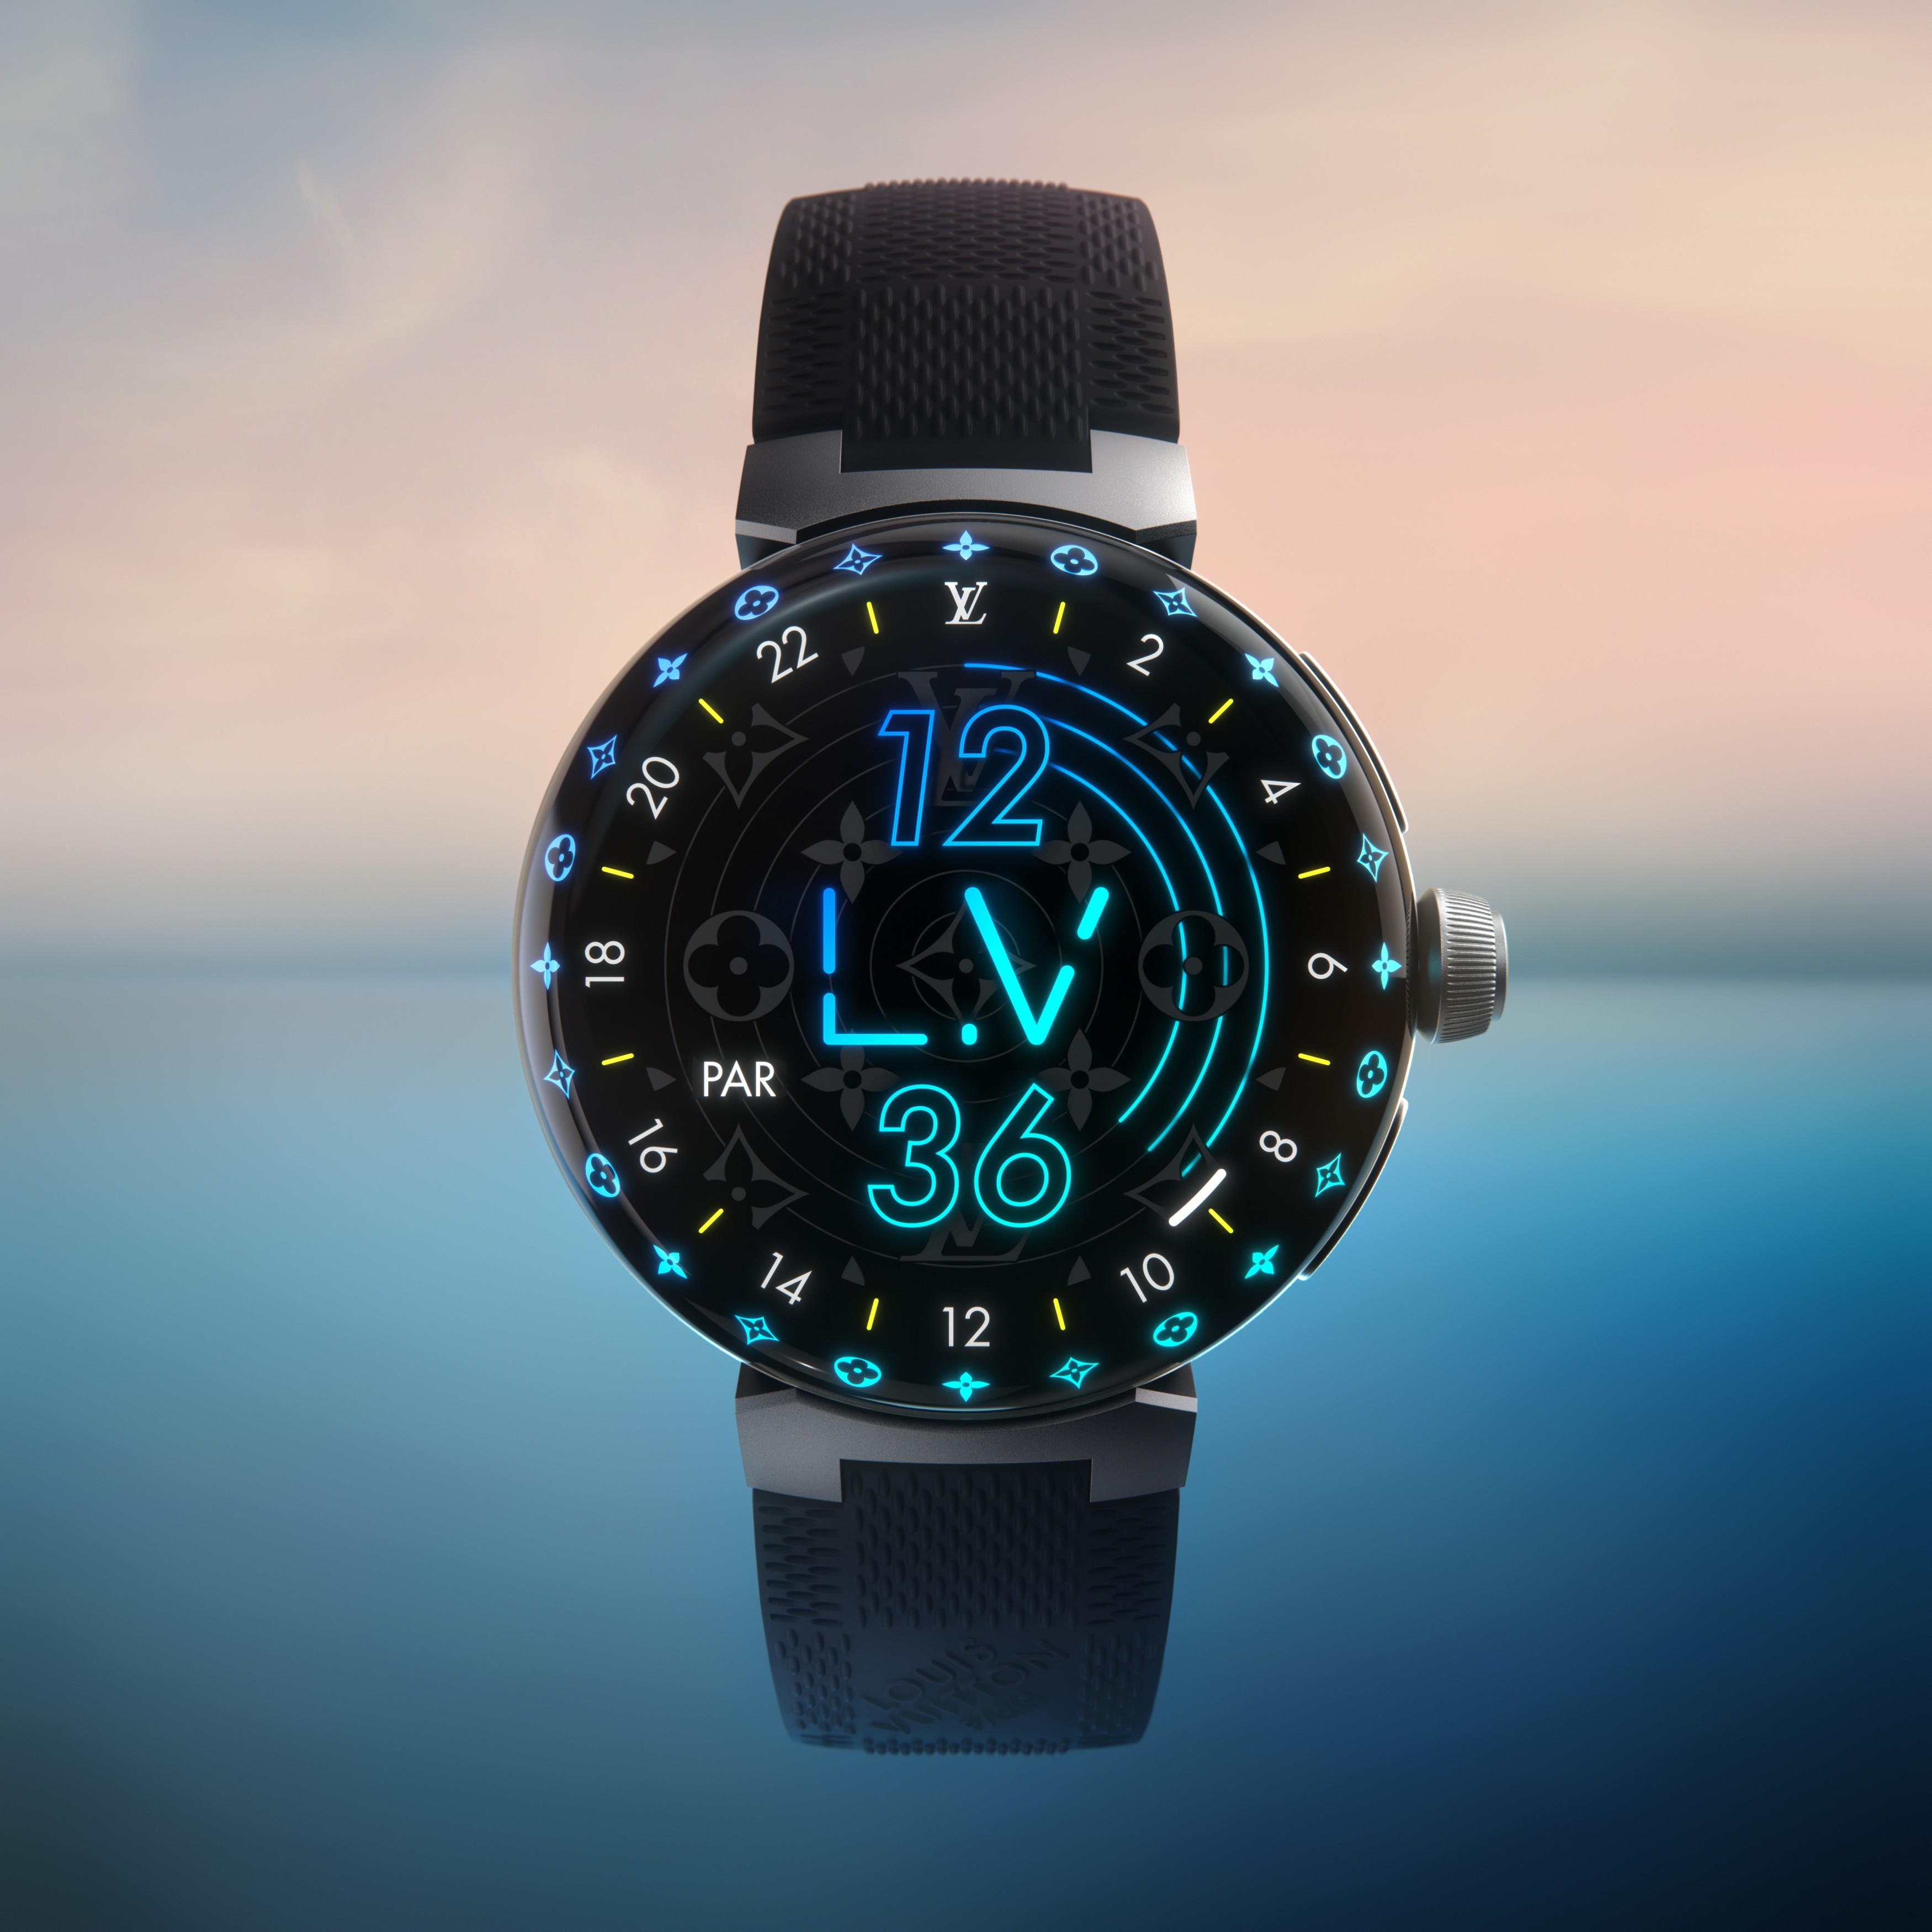 Louis Vuitton Tambour Horizon Light Up Luxury Smartwatch With Snapdragon  Wear 4100 SoC Launched